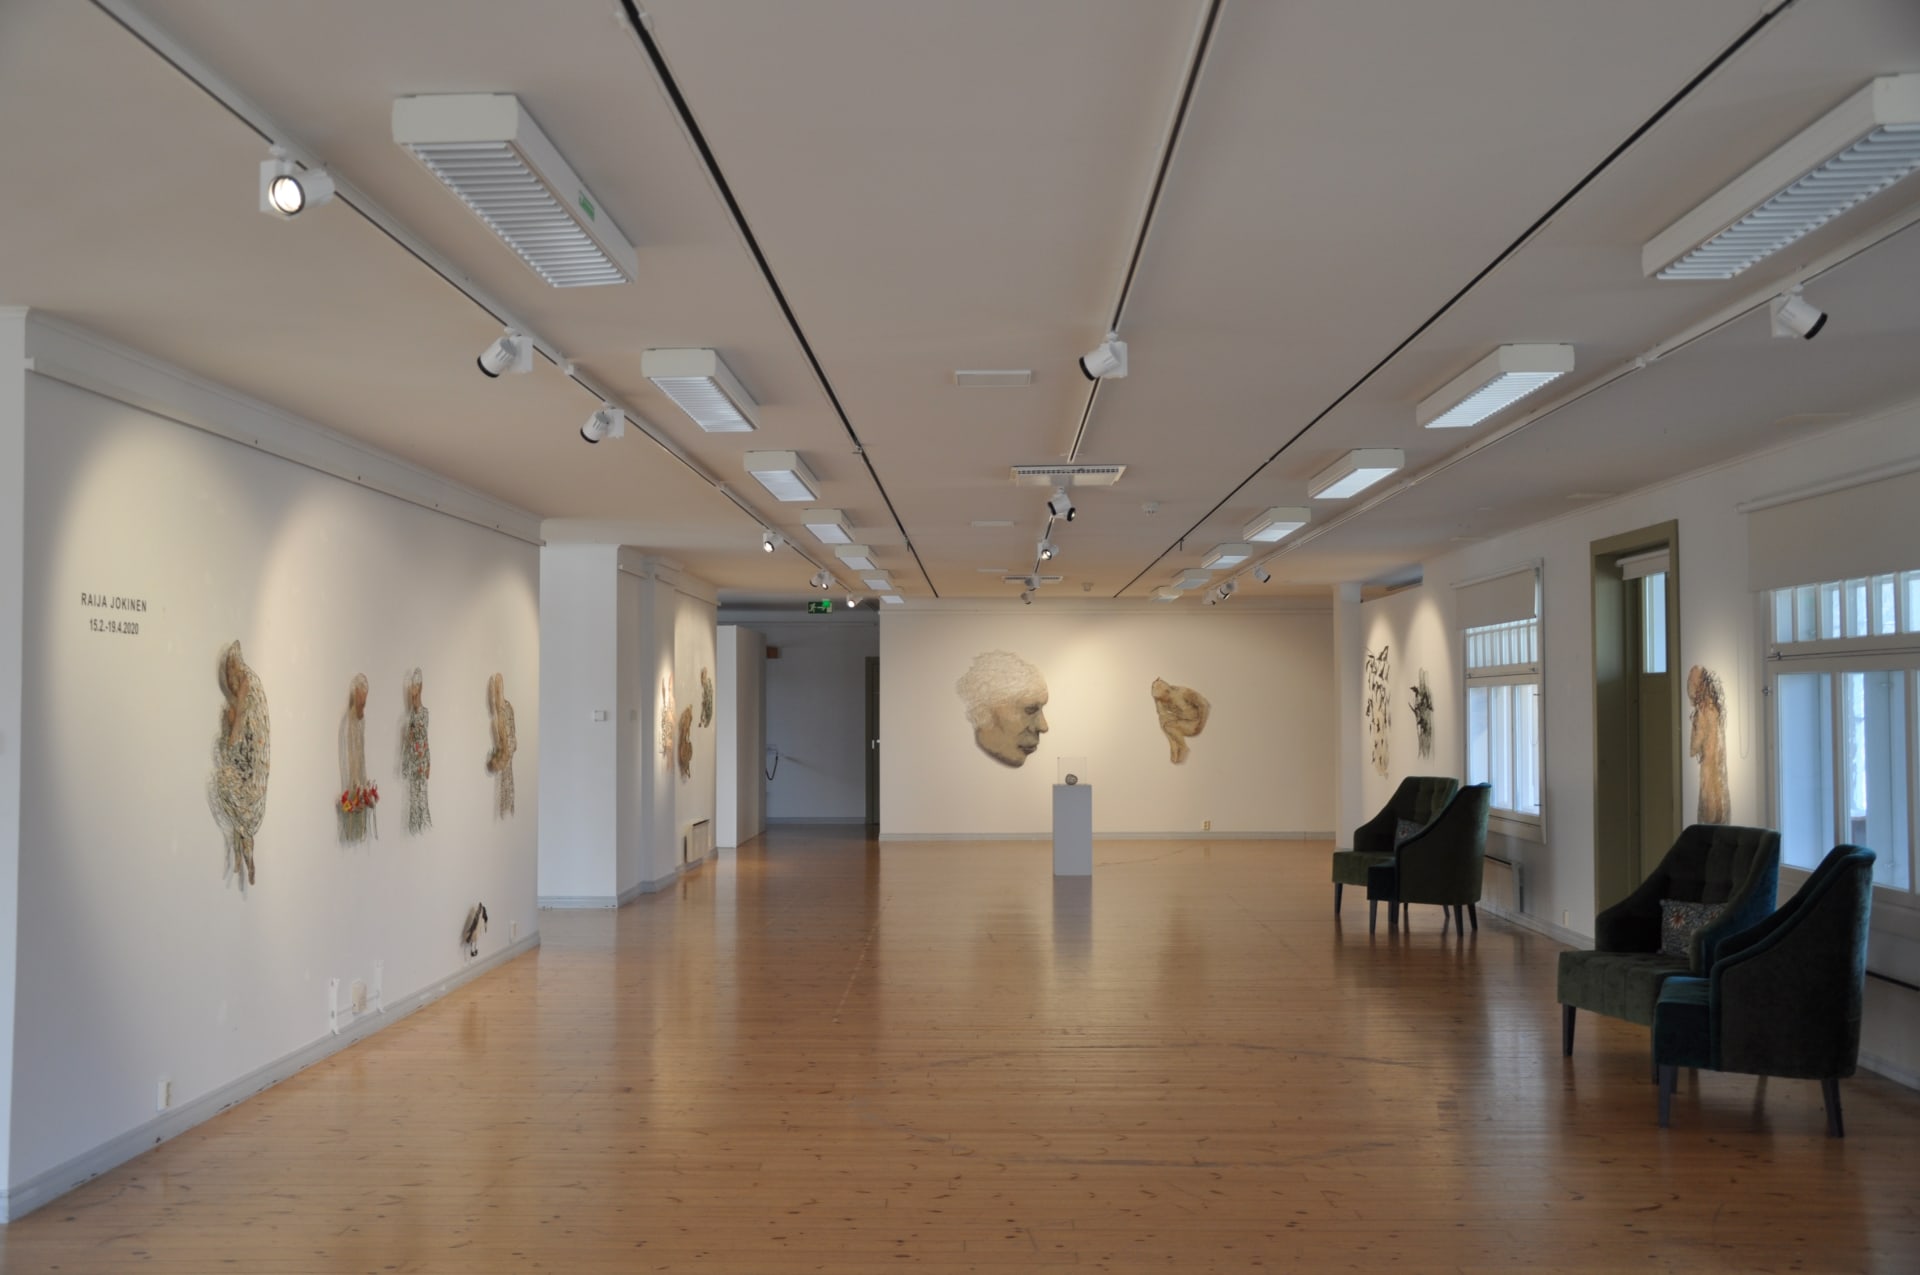 Exhibition hall, artworks and chairs.